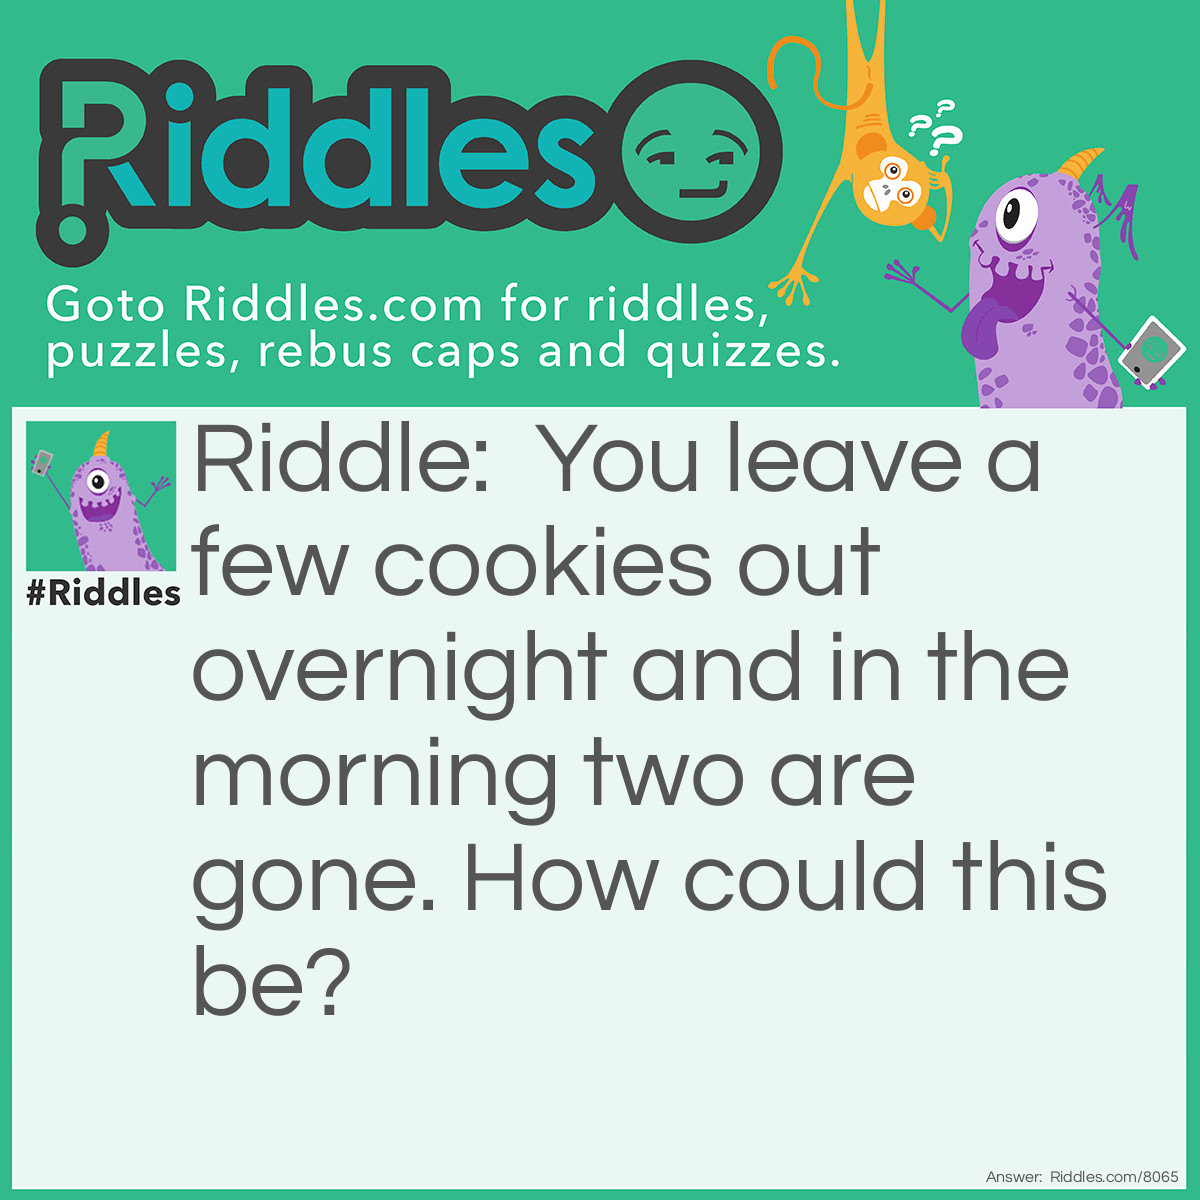 Riddle: You leave a few cookies out overnight and in the morning two are gone. How could this be? Answer: Your roommate woke up and ate some.